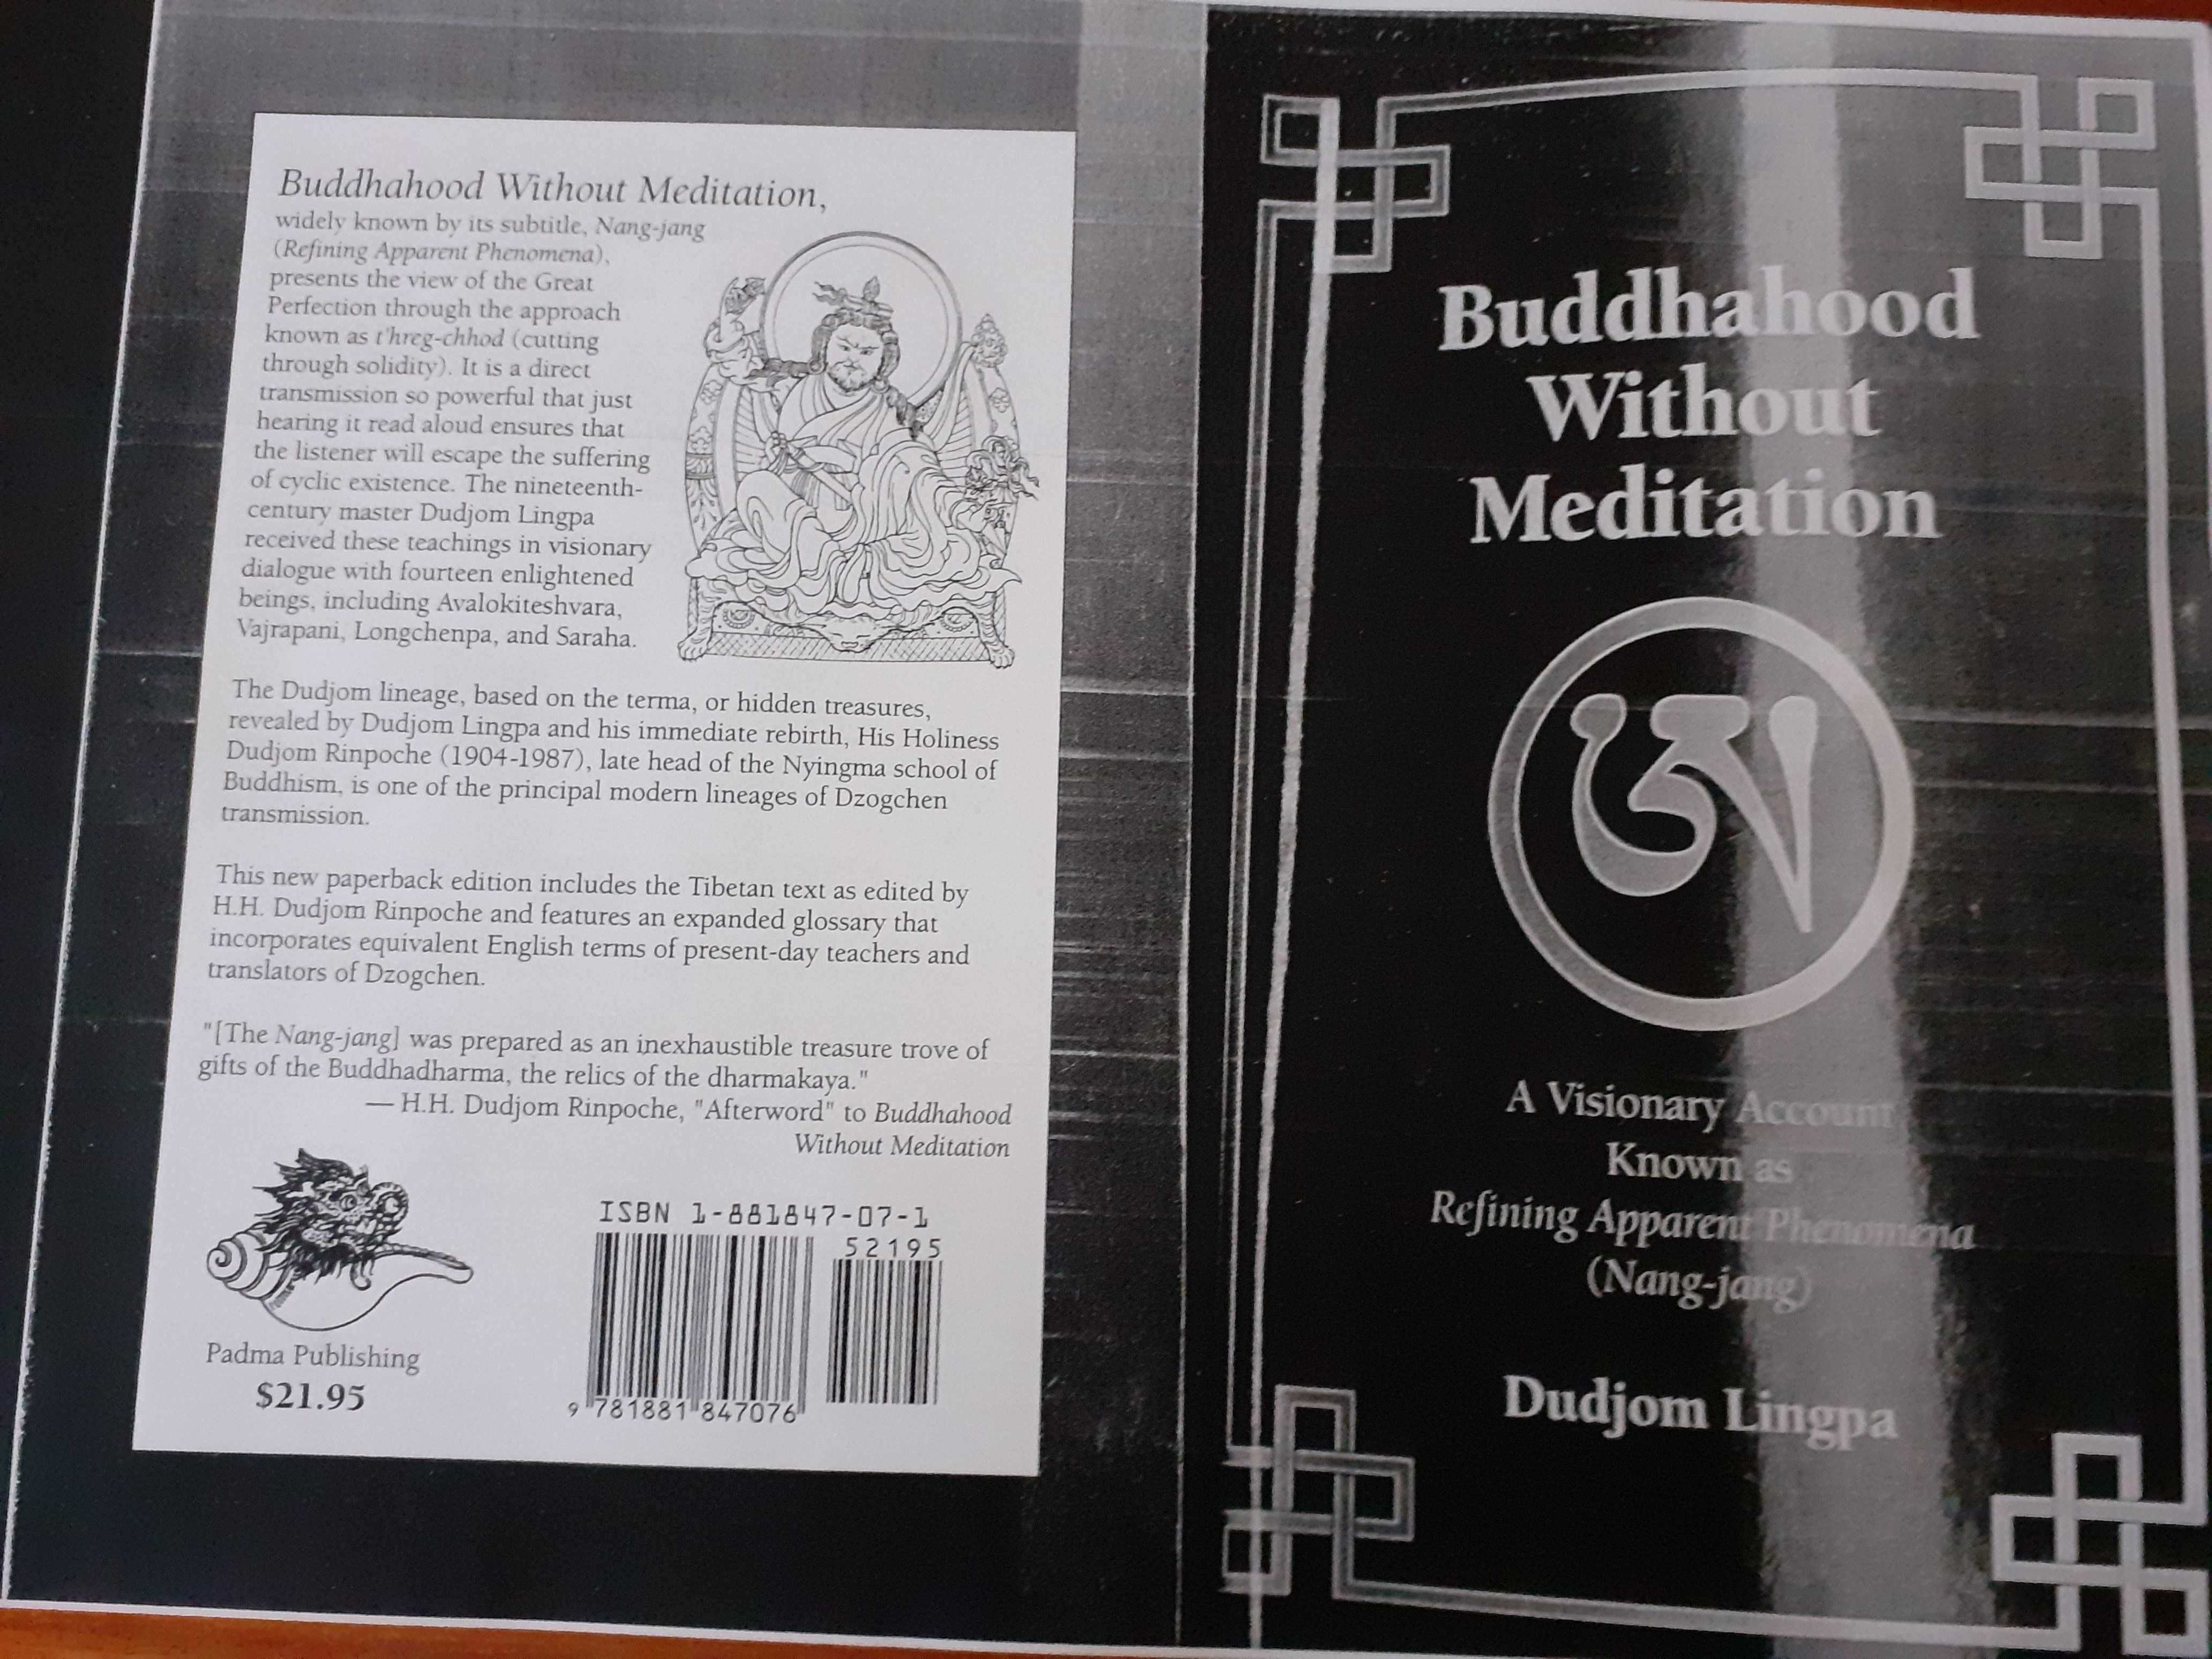 Buddhahood Without Meditation: A Visionary Account Known As Refining A